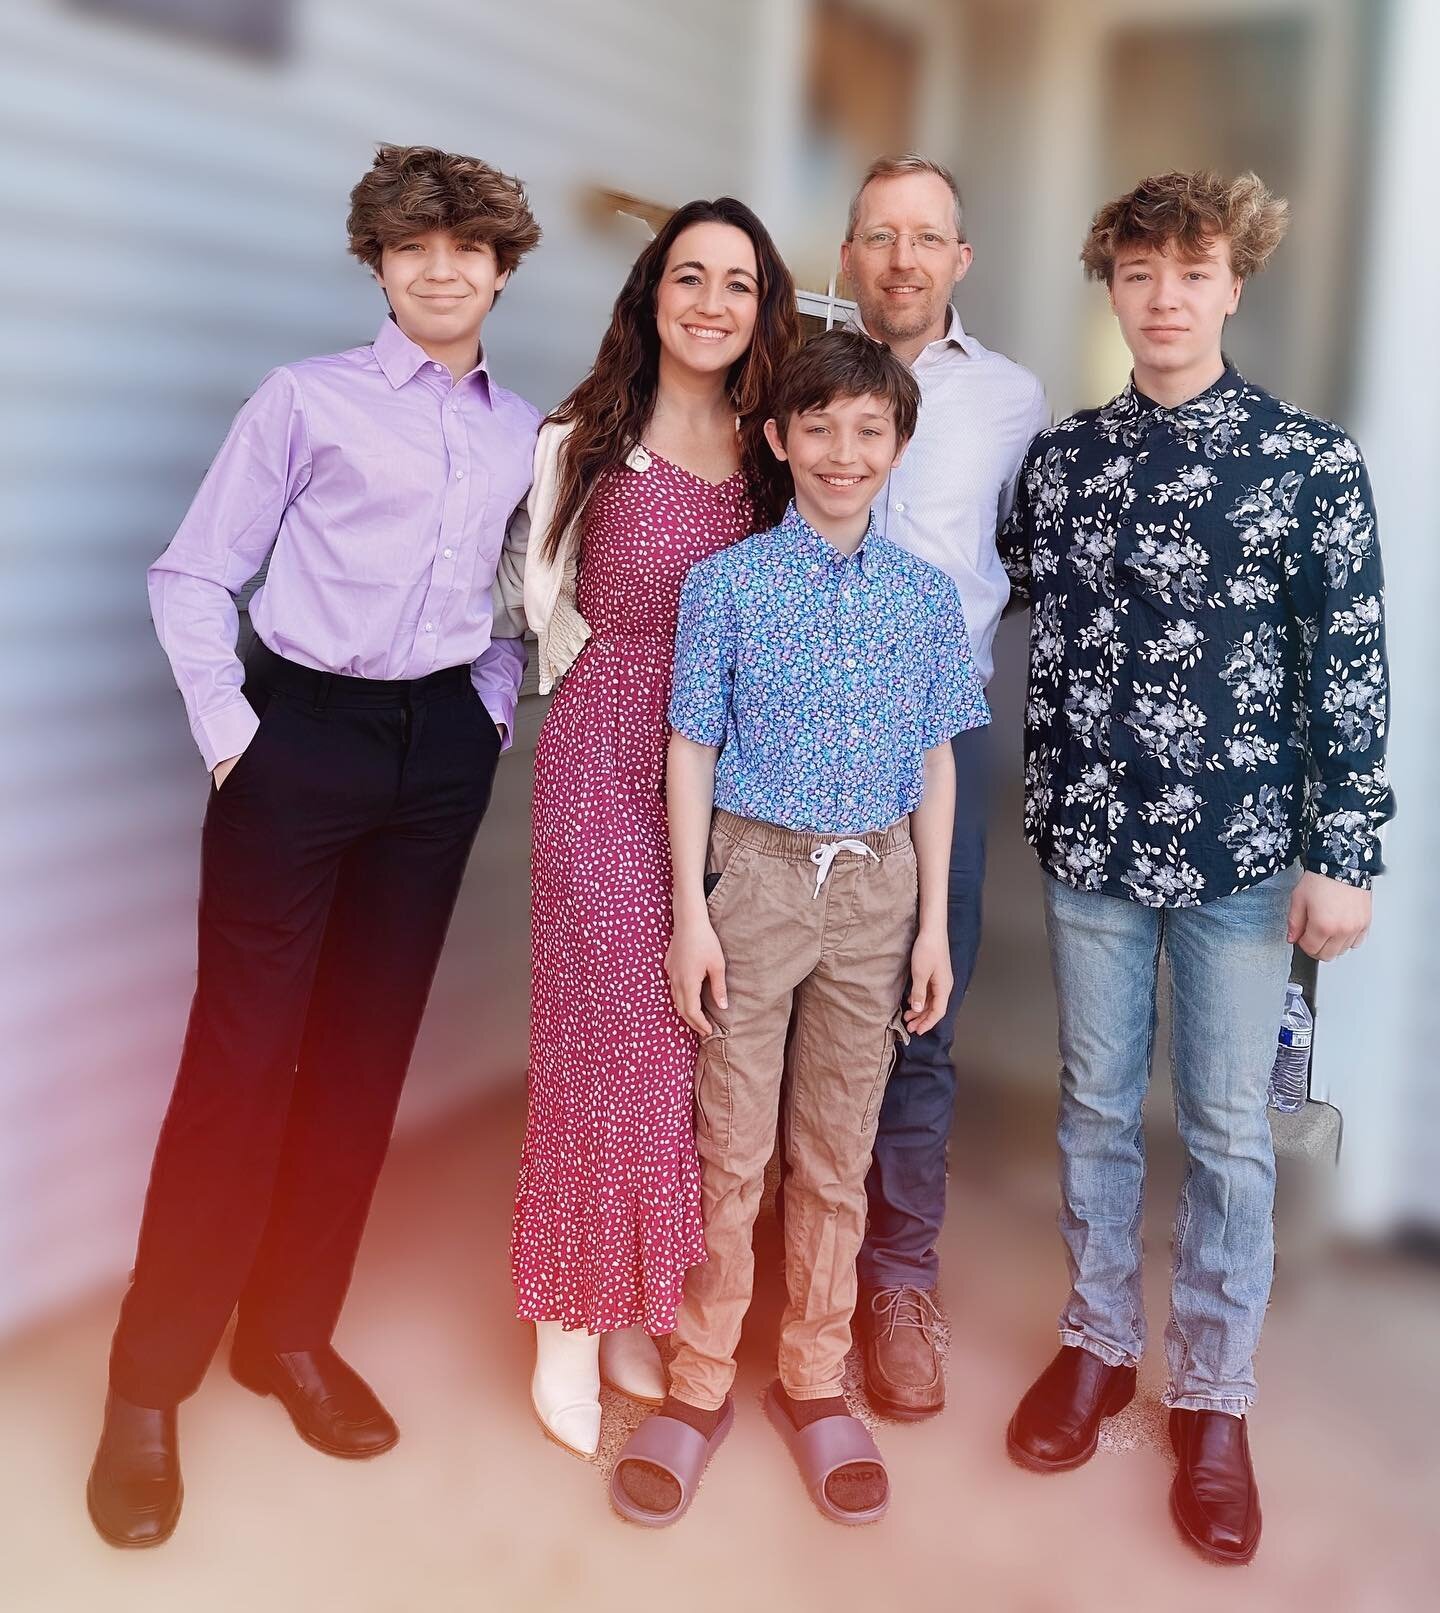 All the loves of my life on Easter. 🌅🙌🏼On our way to celebrate that Jesus rose from the grave and defeated our death. The future and beyond is nothing but hope and joy because of our purchased lives on a rugged old cross. A weapon of torture was m